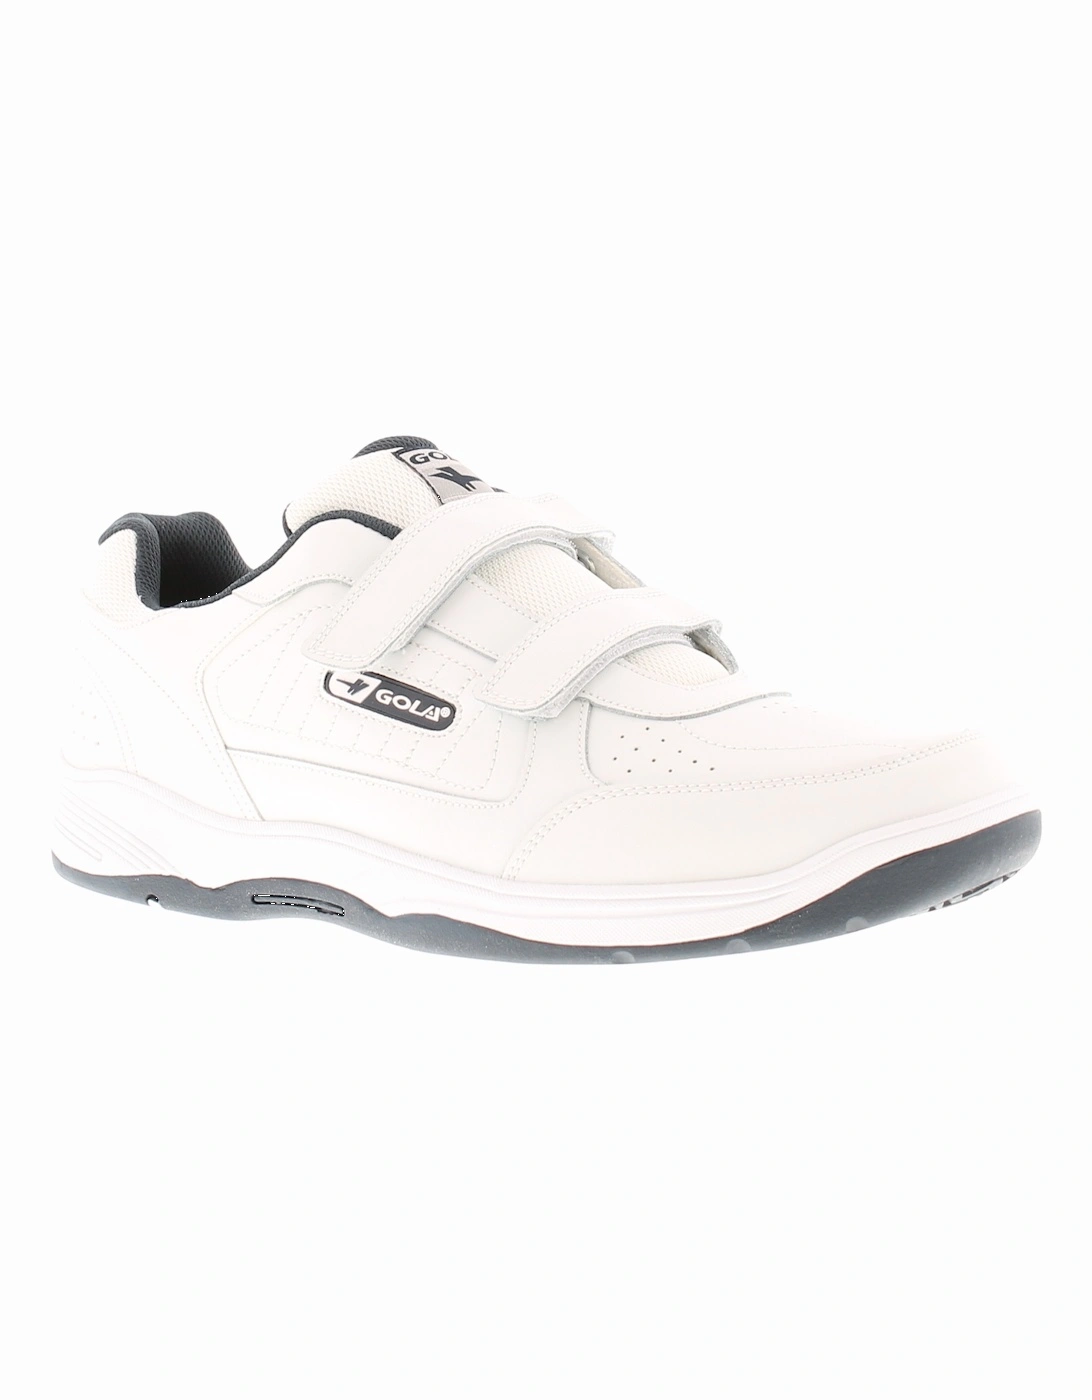 Mens Trainers Belmont touch fastening Wide XL Touch Fastening white UK Size, 6 of 5